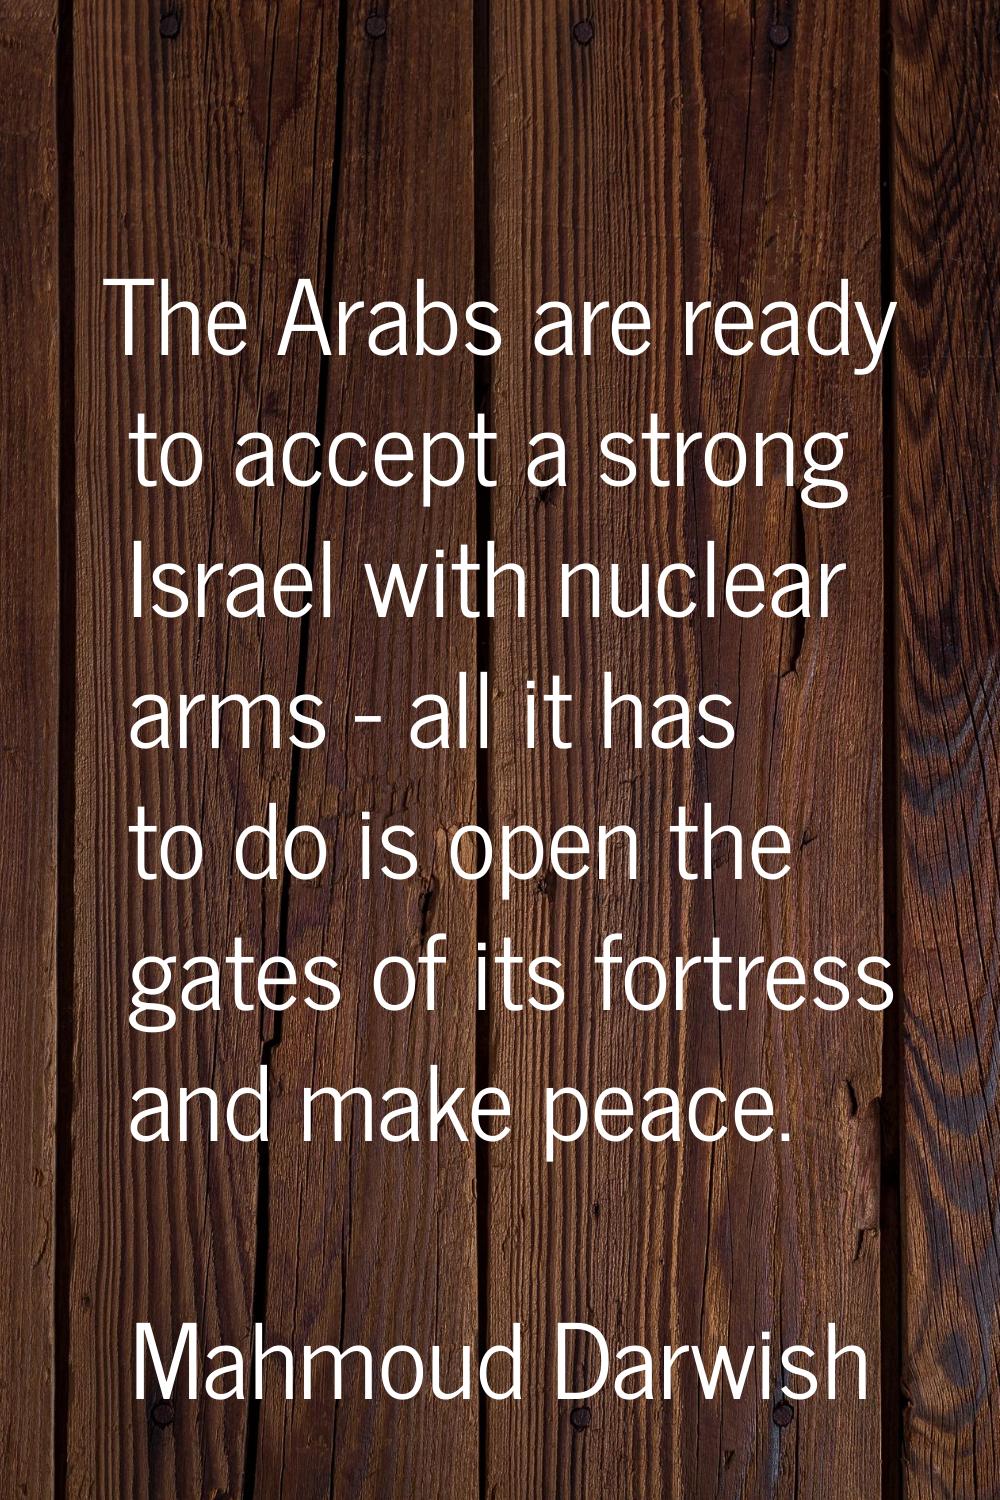 The Arabs are ready to accept a strong Israel with nuclear arms - all it has to do is open the gate